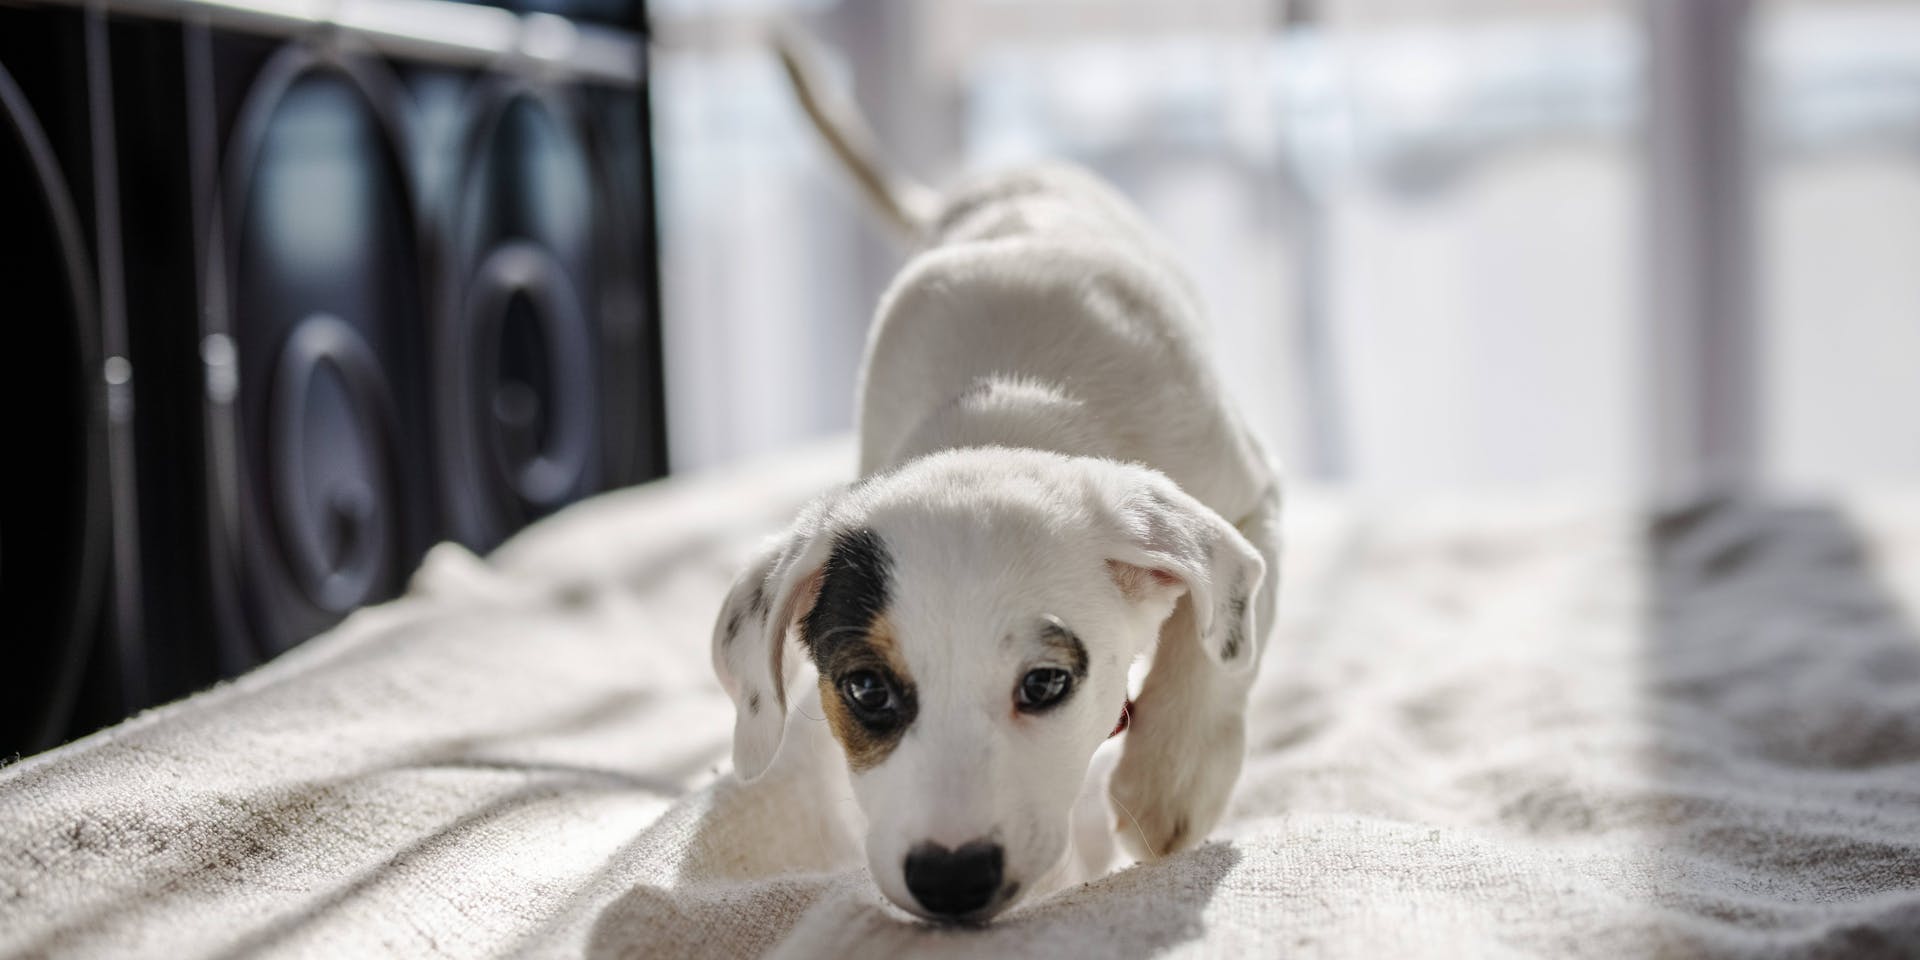 A white dog puppy on a bed.